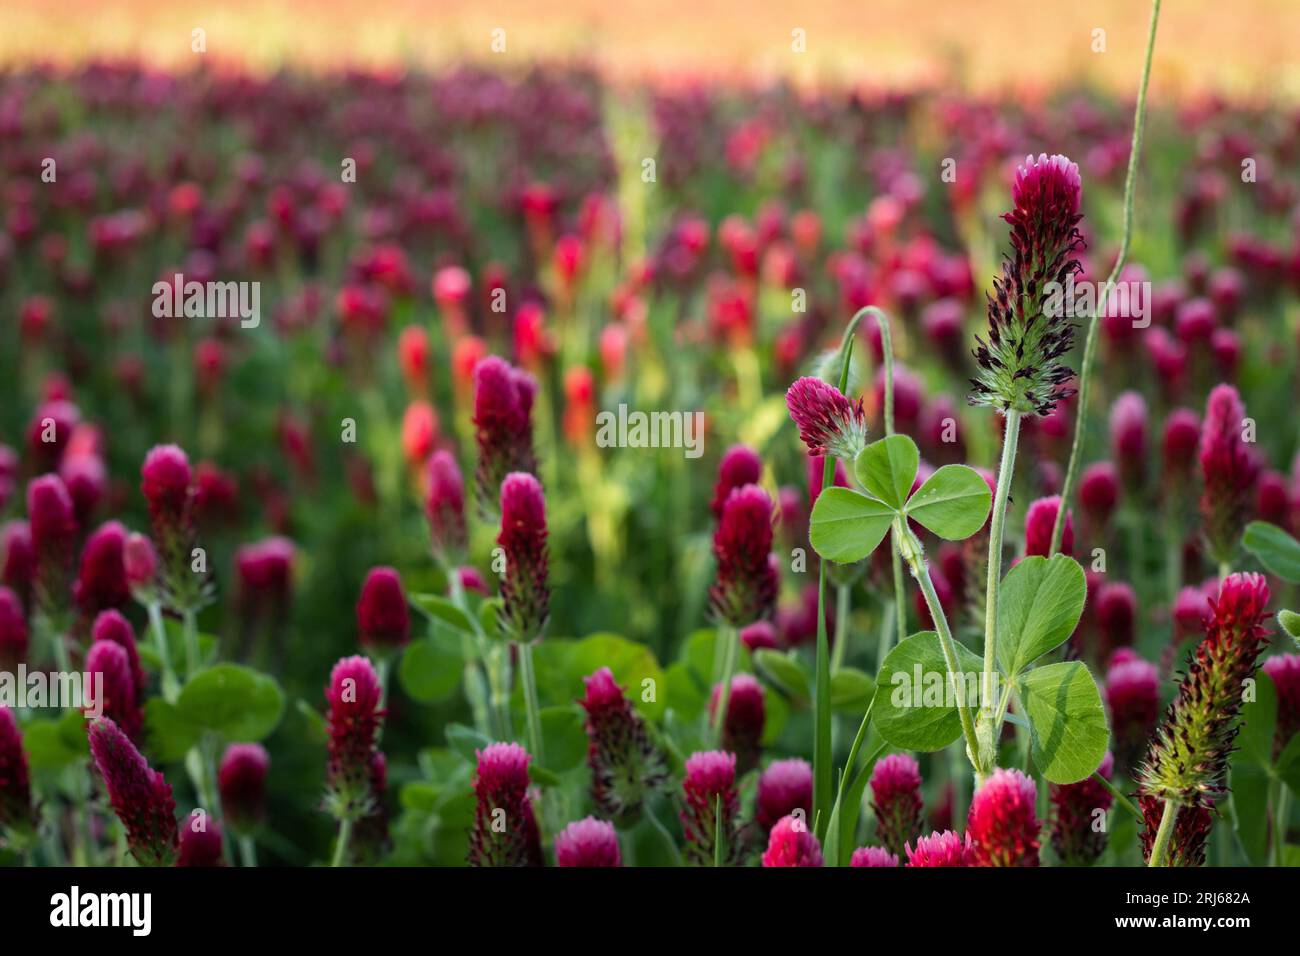 A tranquil scene of a red clover field in the light of late afternoon. Trifolium rubens. Stock Photo